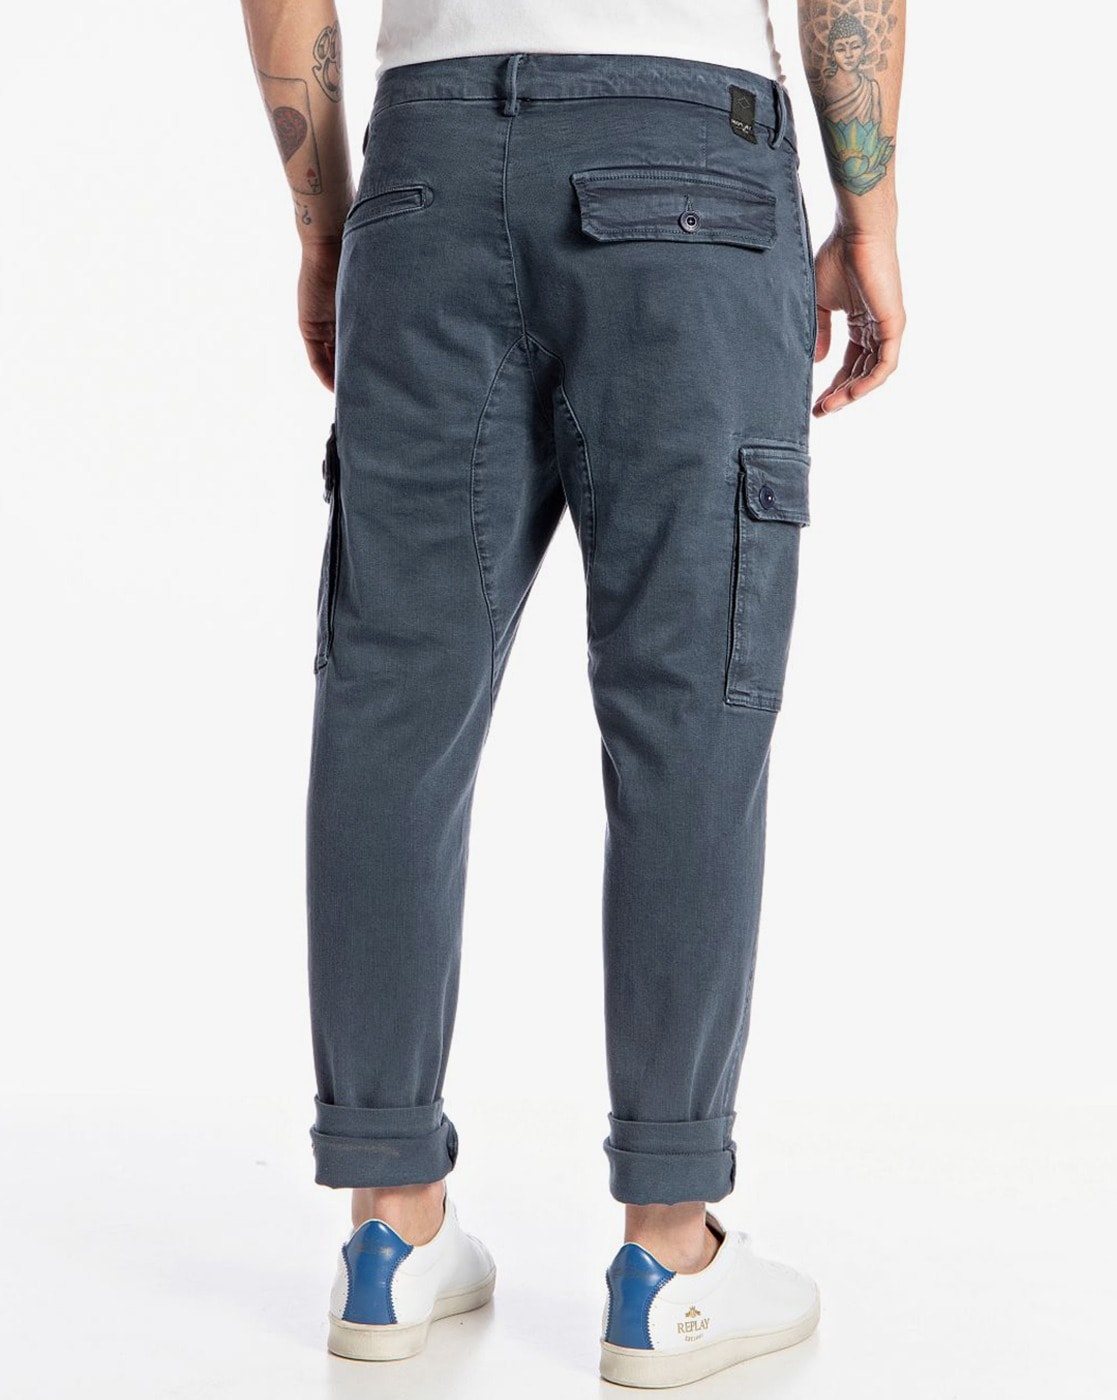 Dirty Stud Cargo Jeans : Delicious Boutique